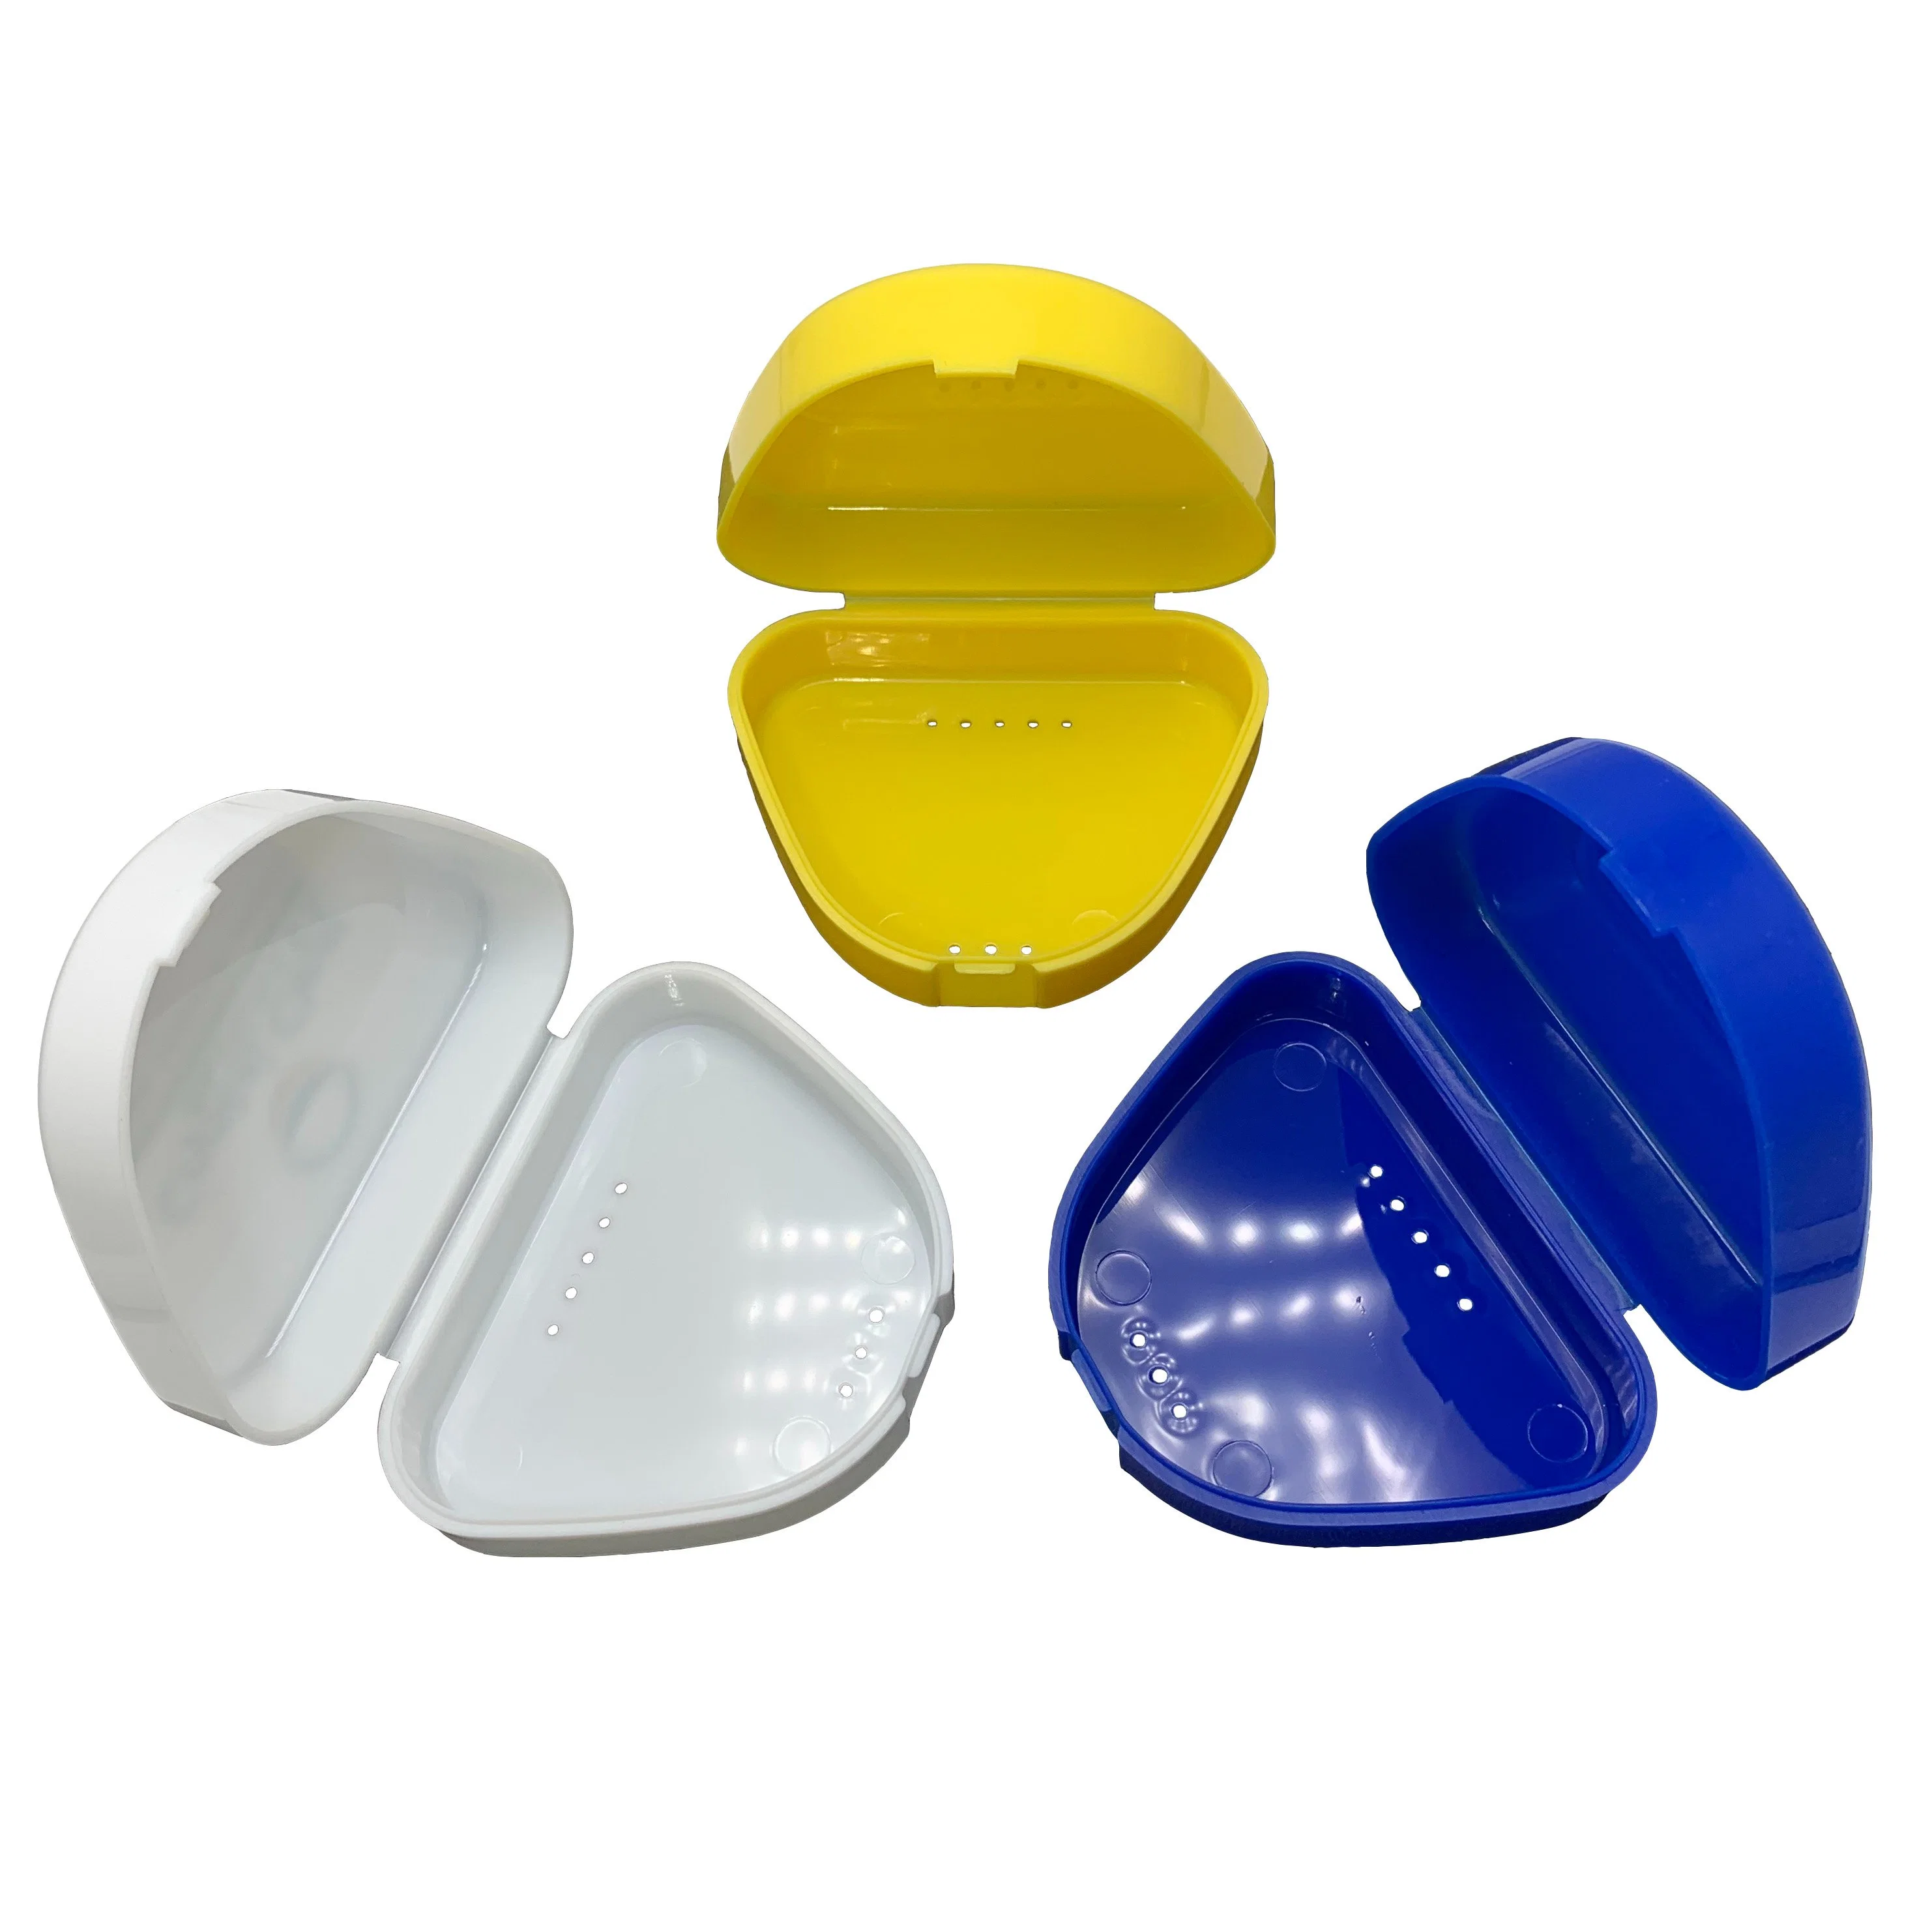 Wholesale/Supplier Compact Exquisite Dental Retainer Box Orthodontic for Travel